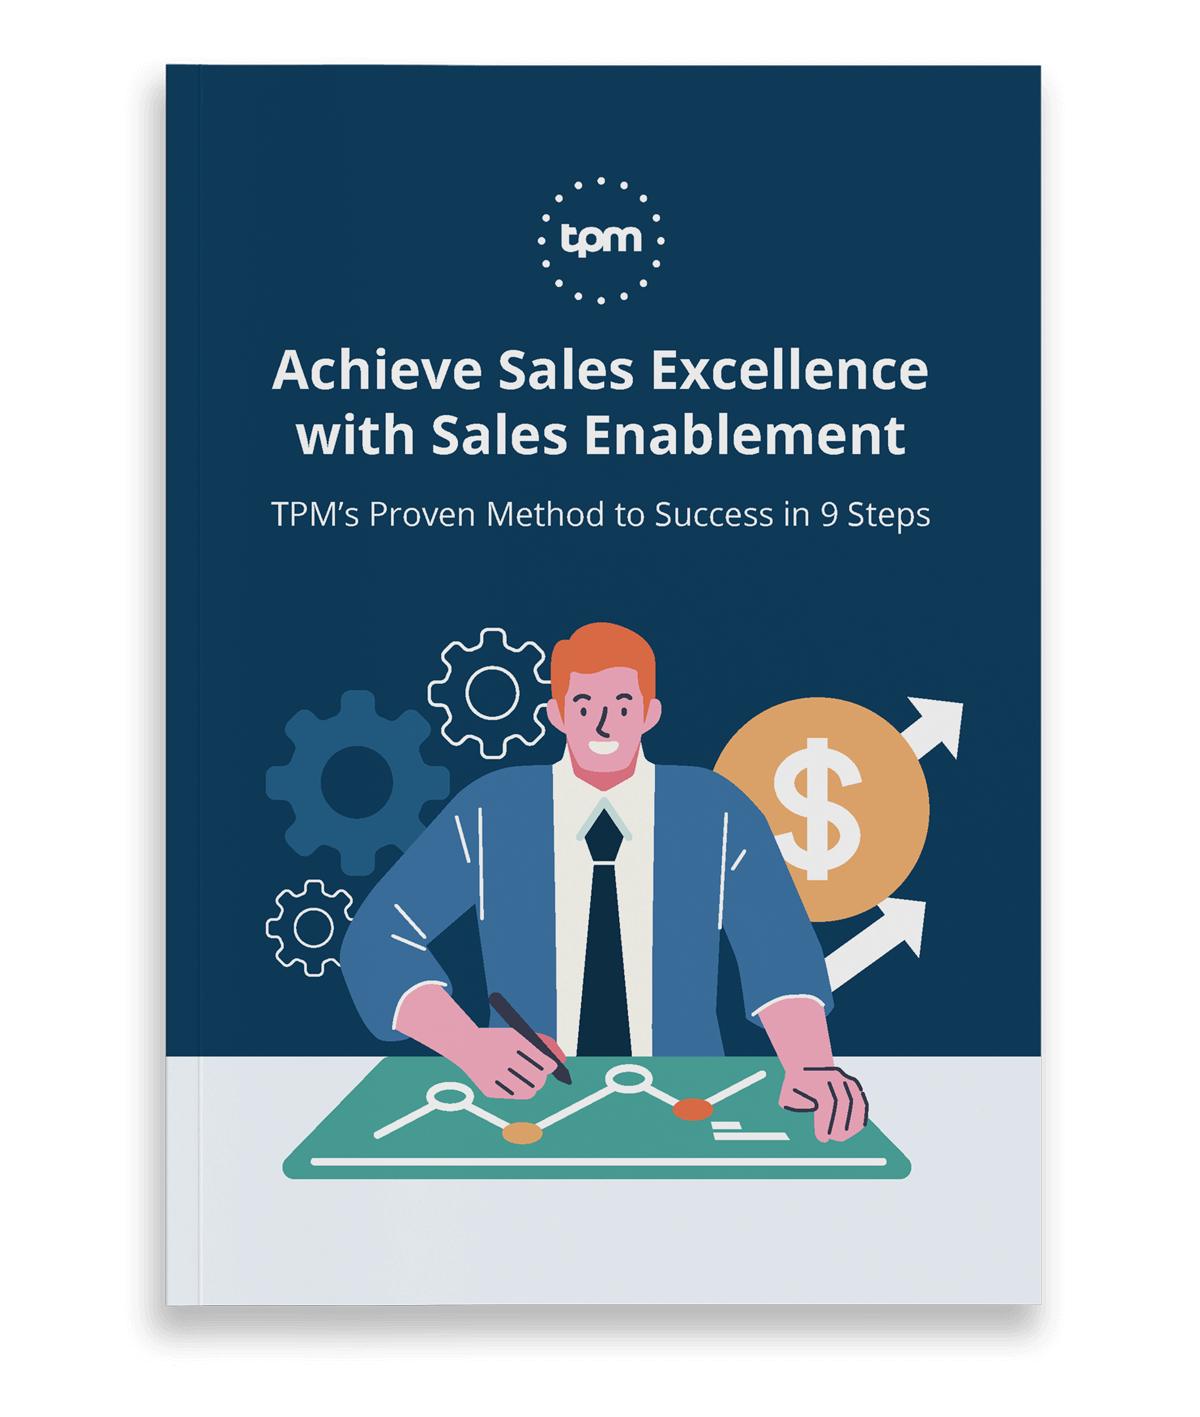 Achieve Sales Excellence with Sales Enablement